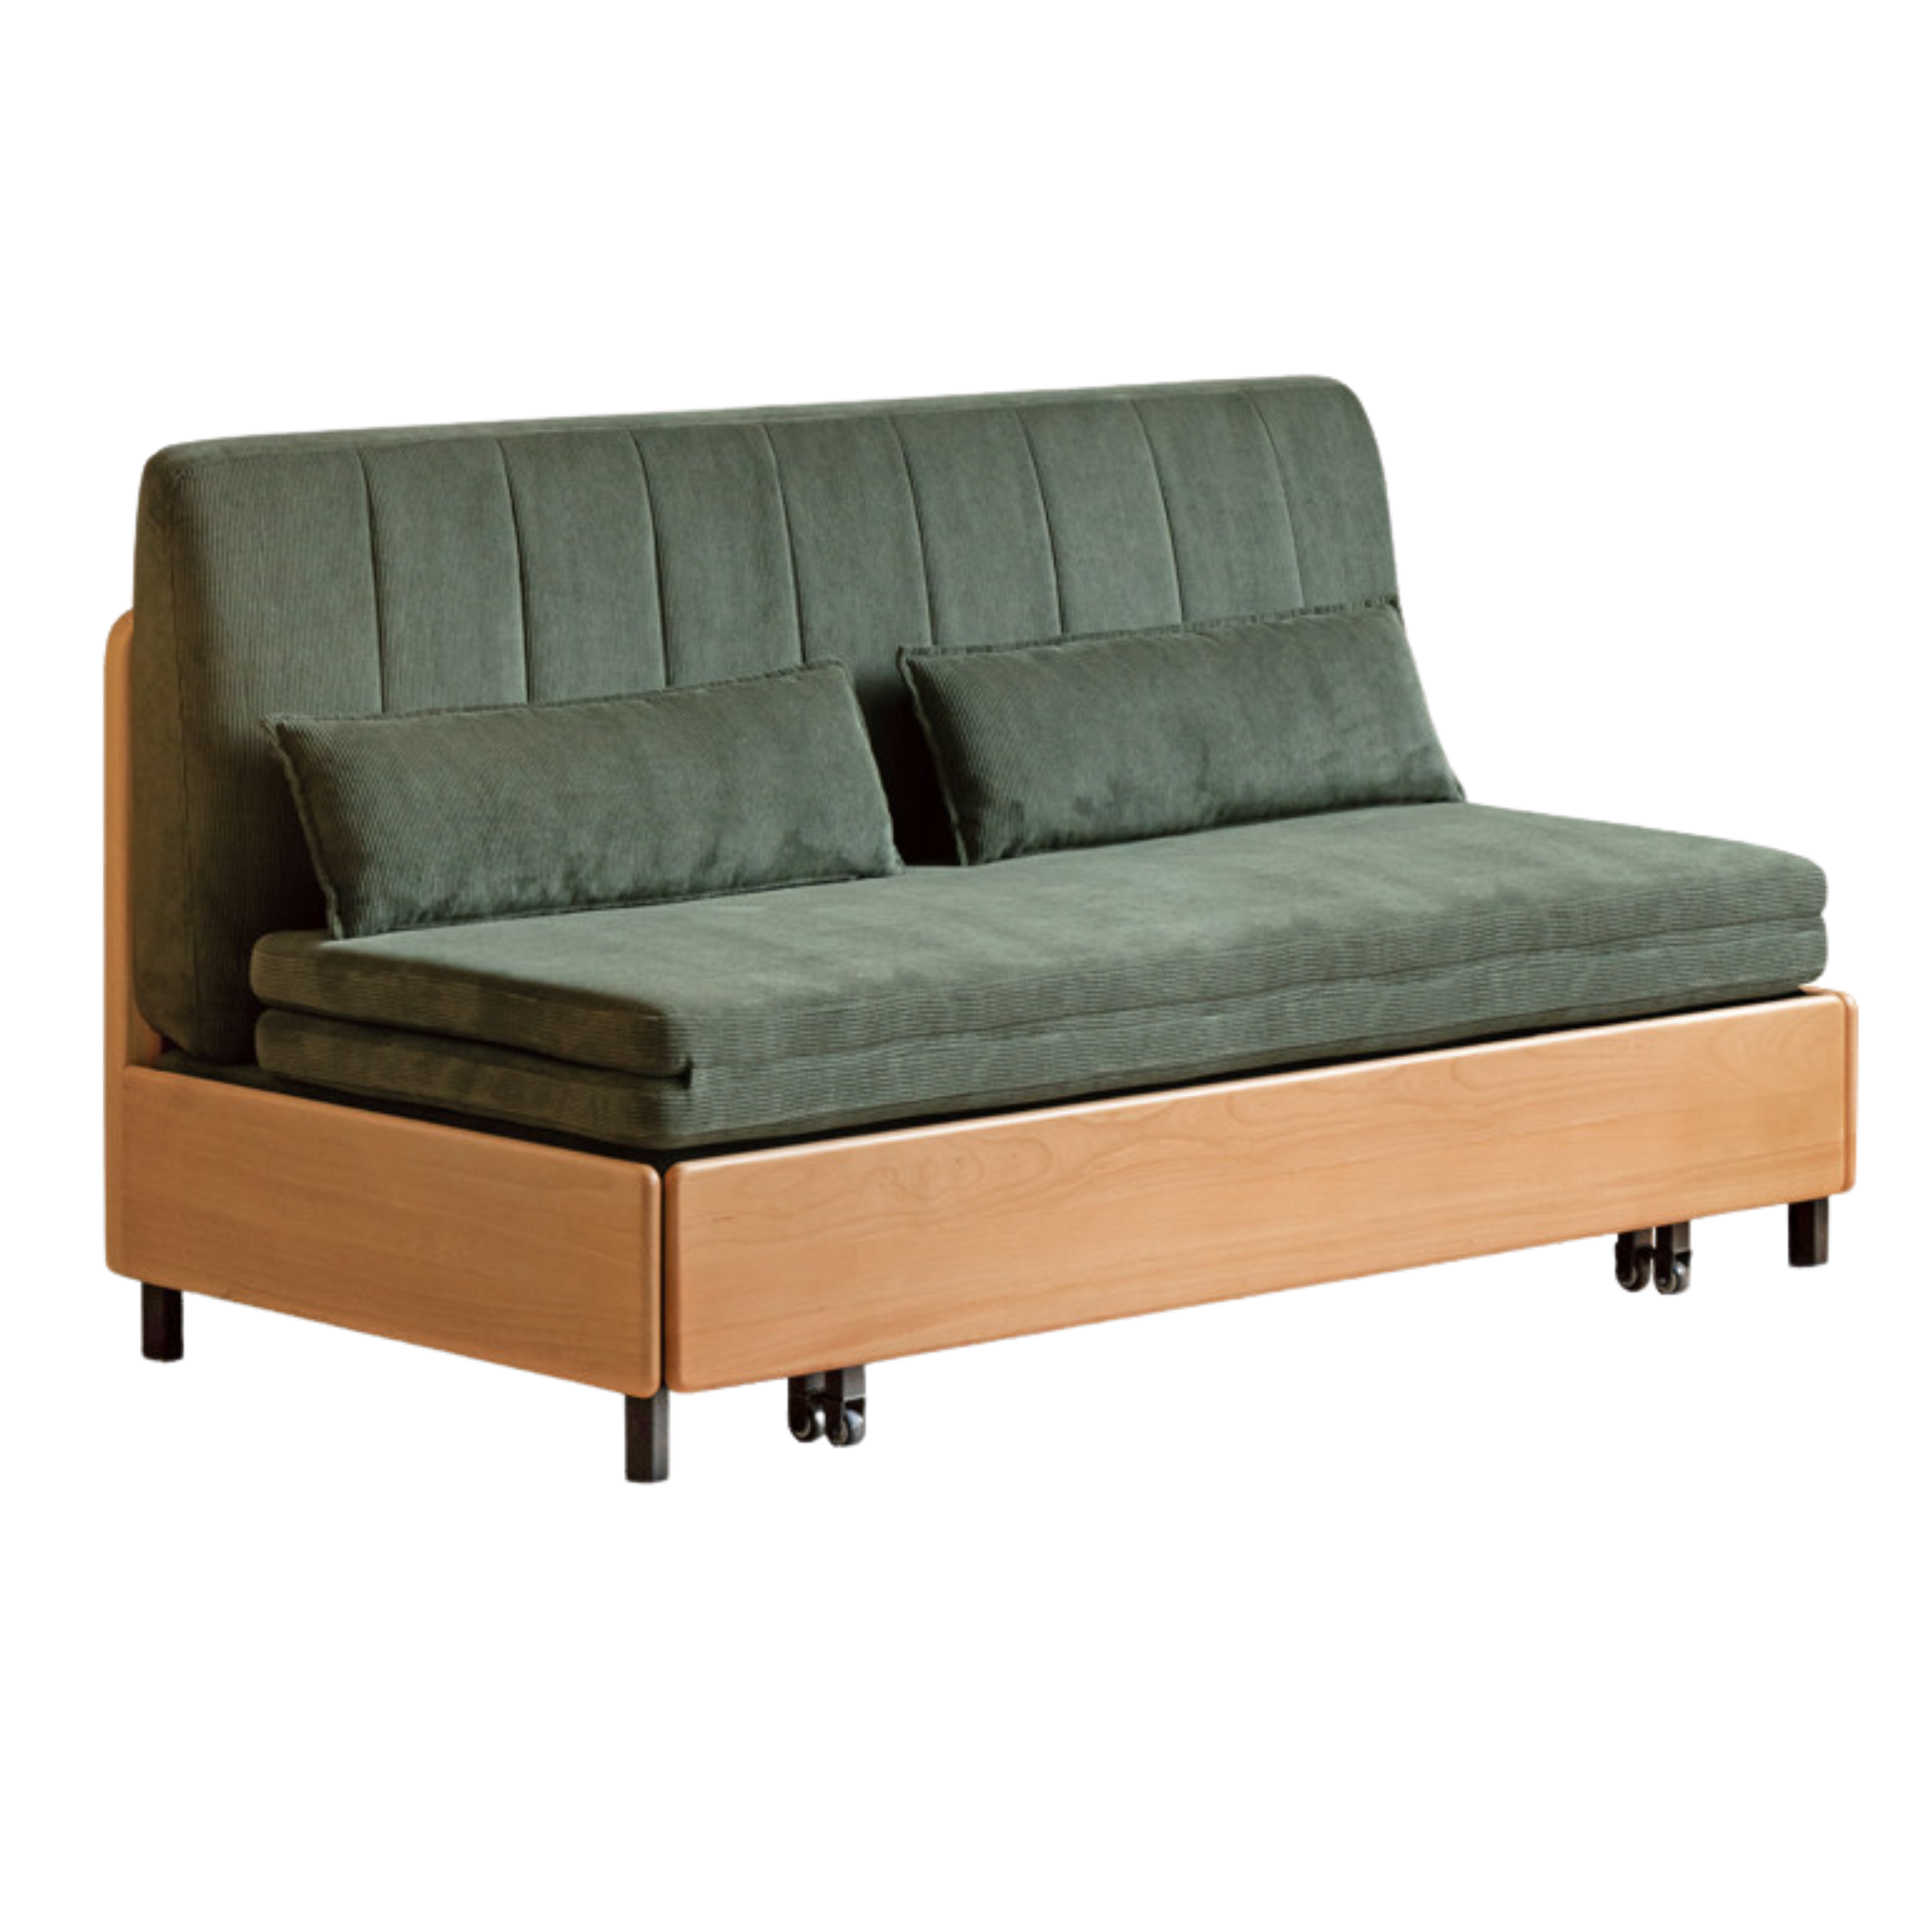 Beech solid wood retractable fabric sofa bed